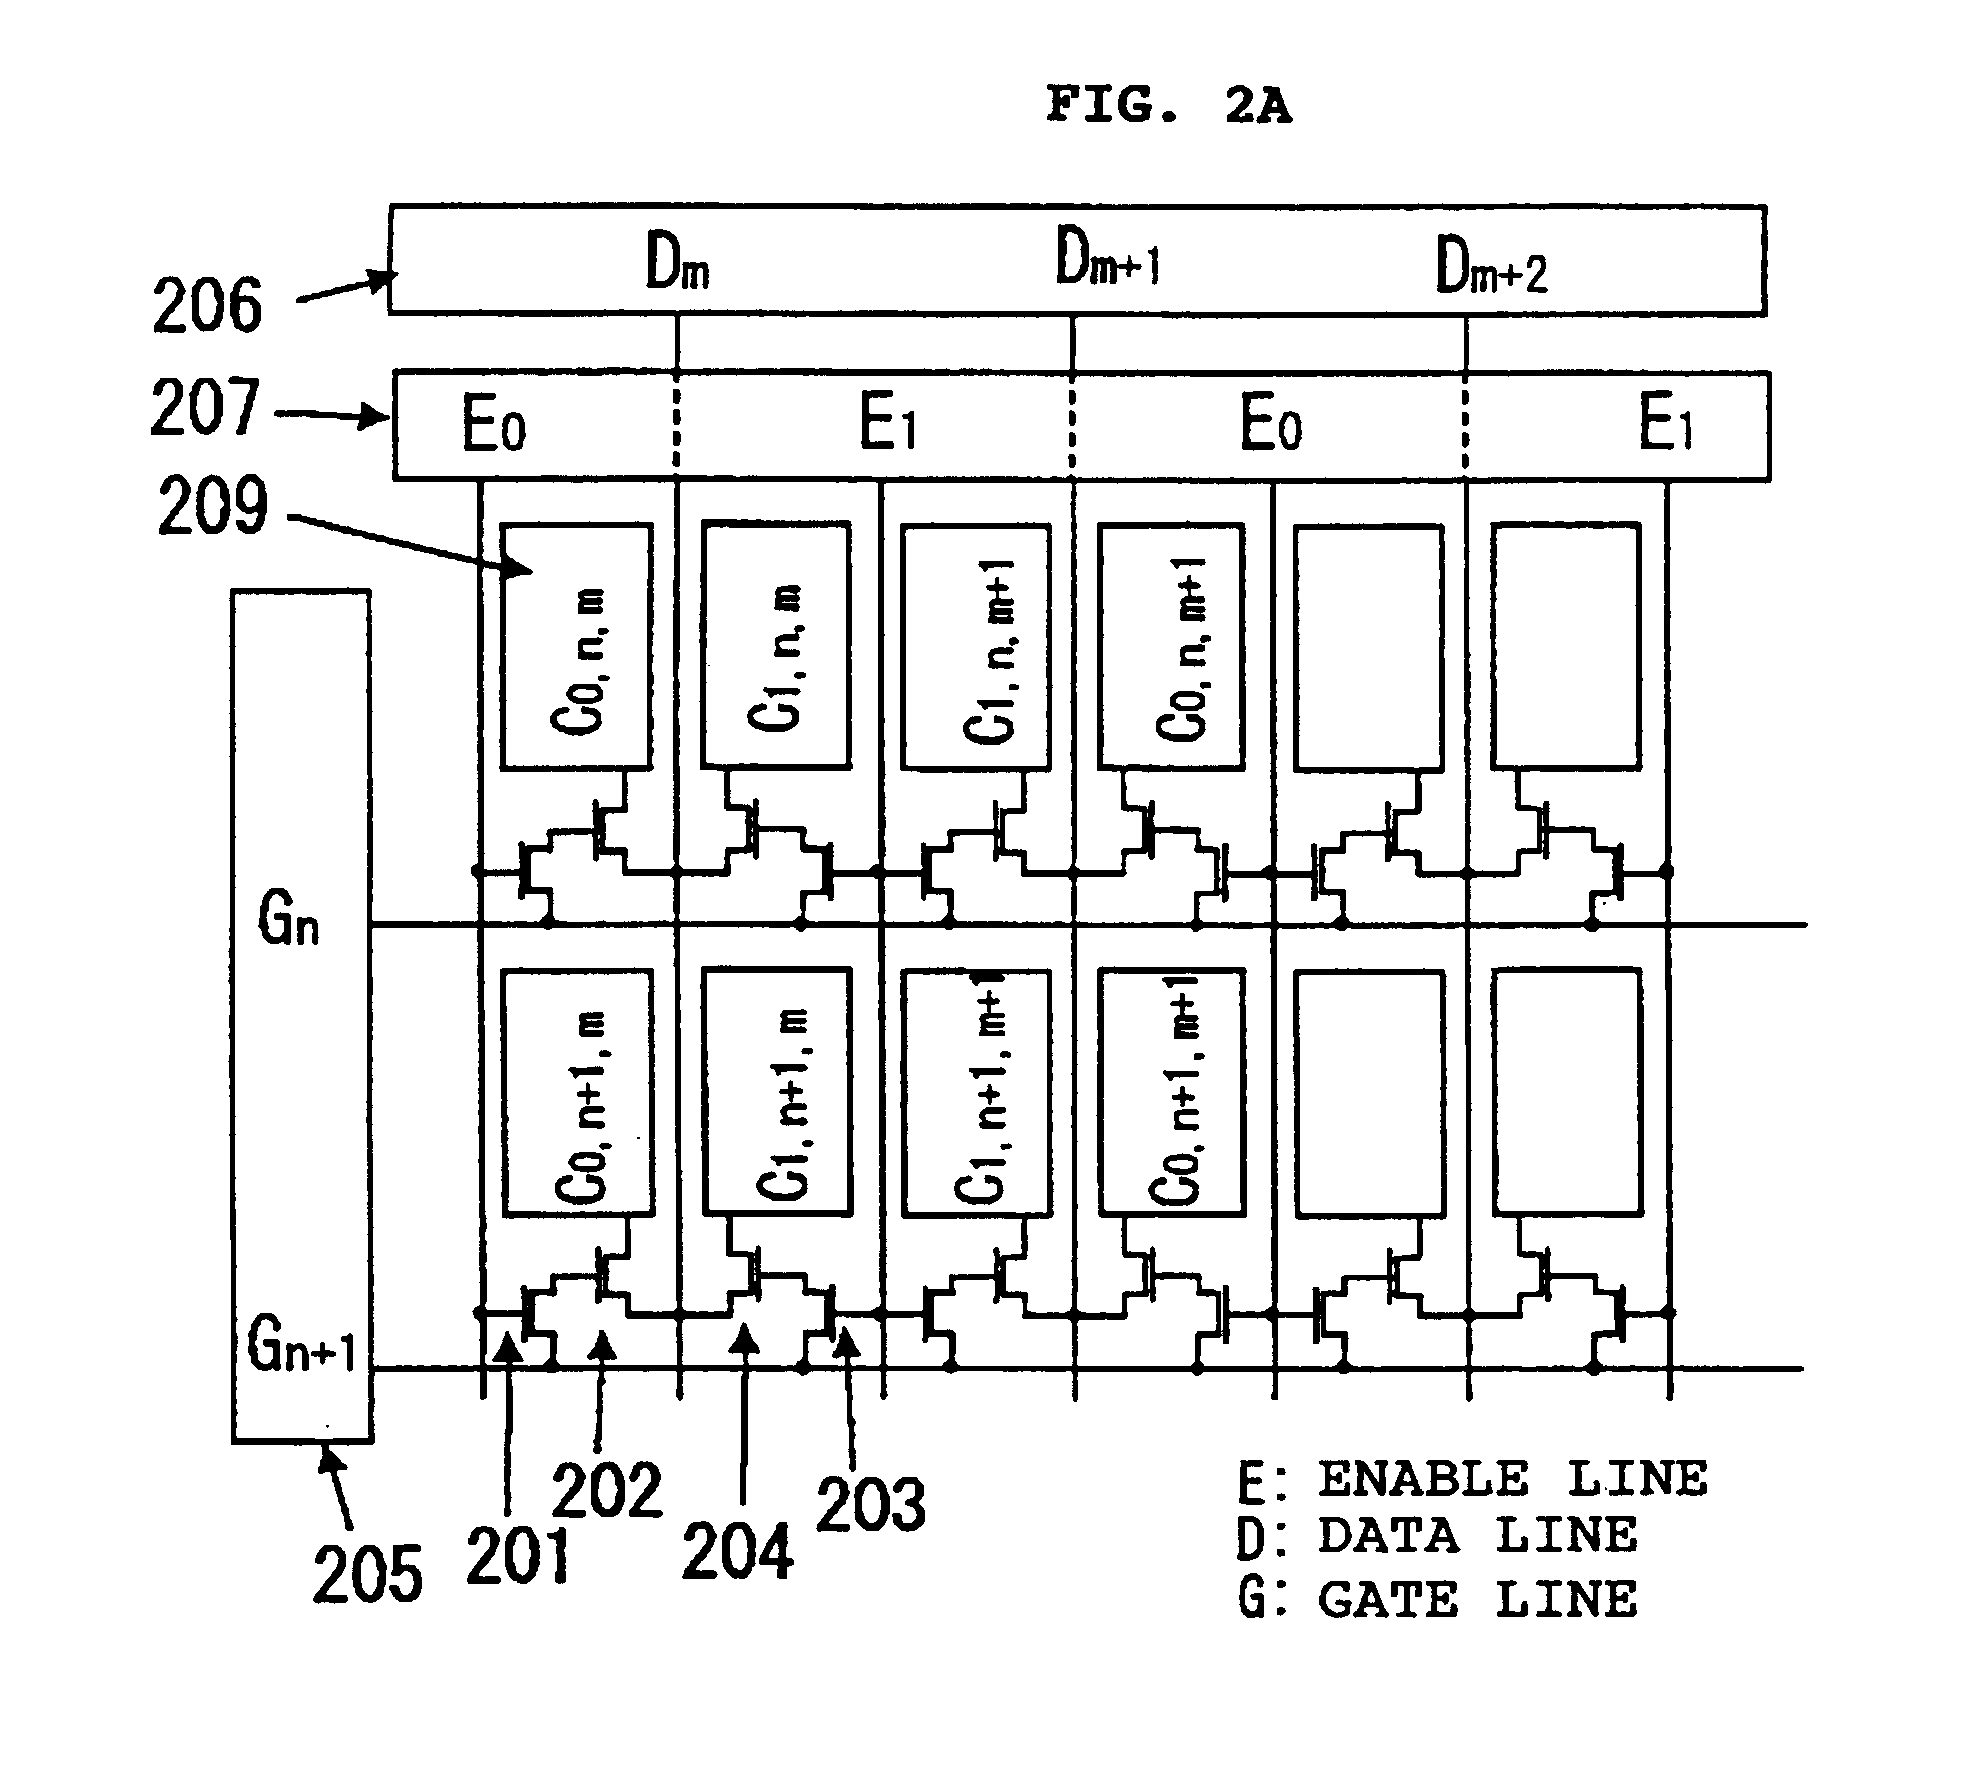 Display device driven with dual transistors